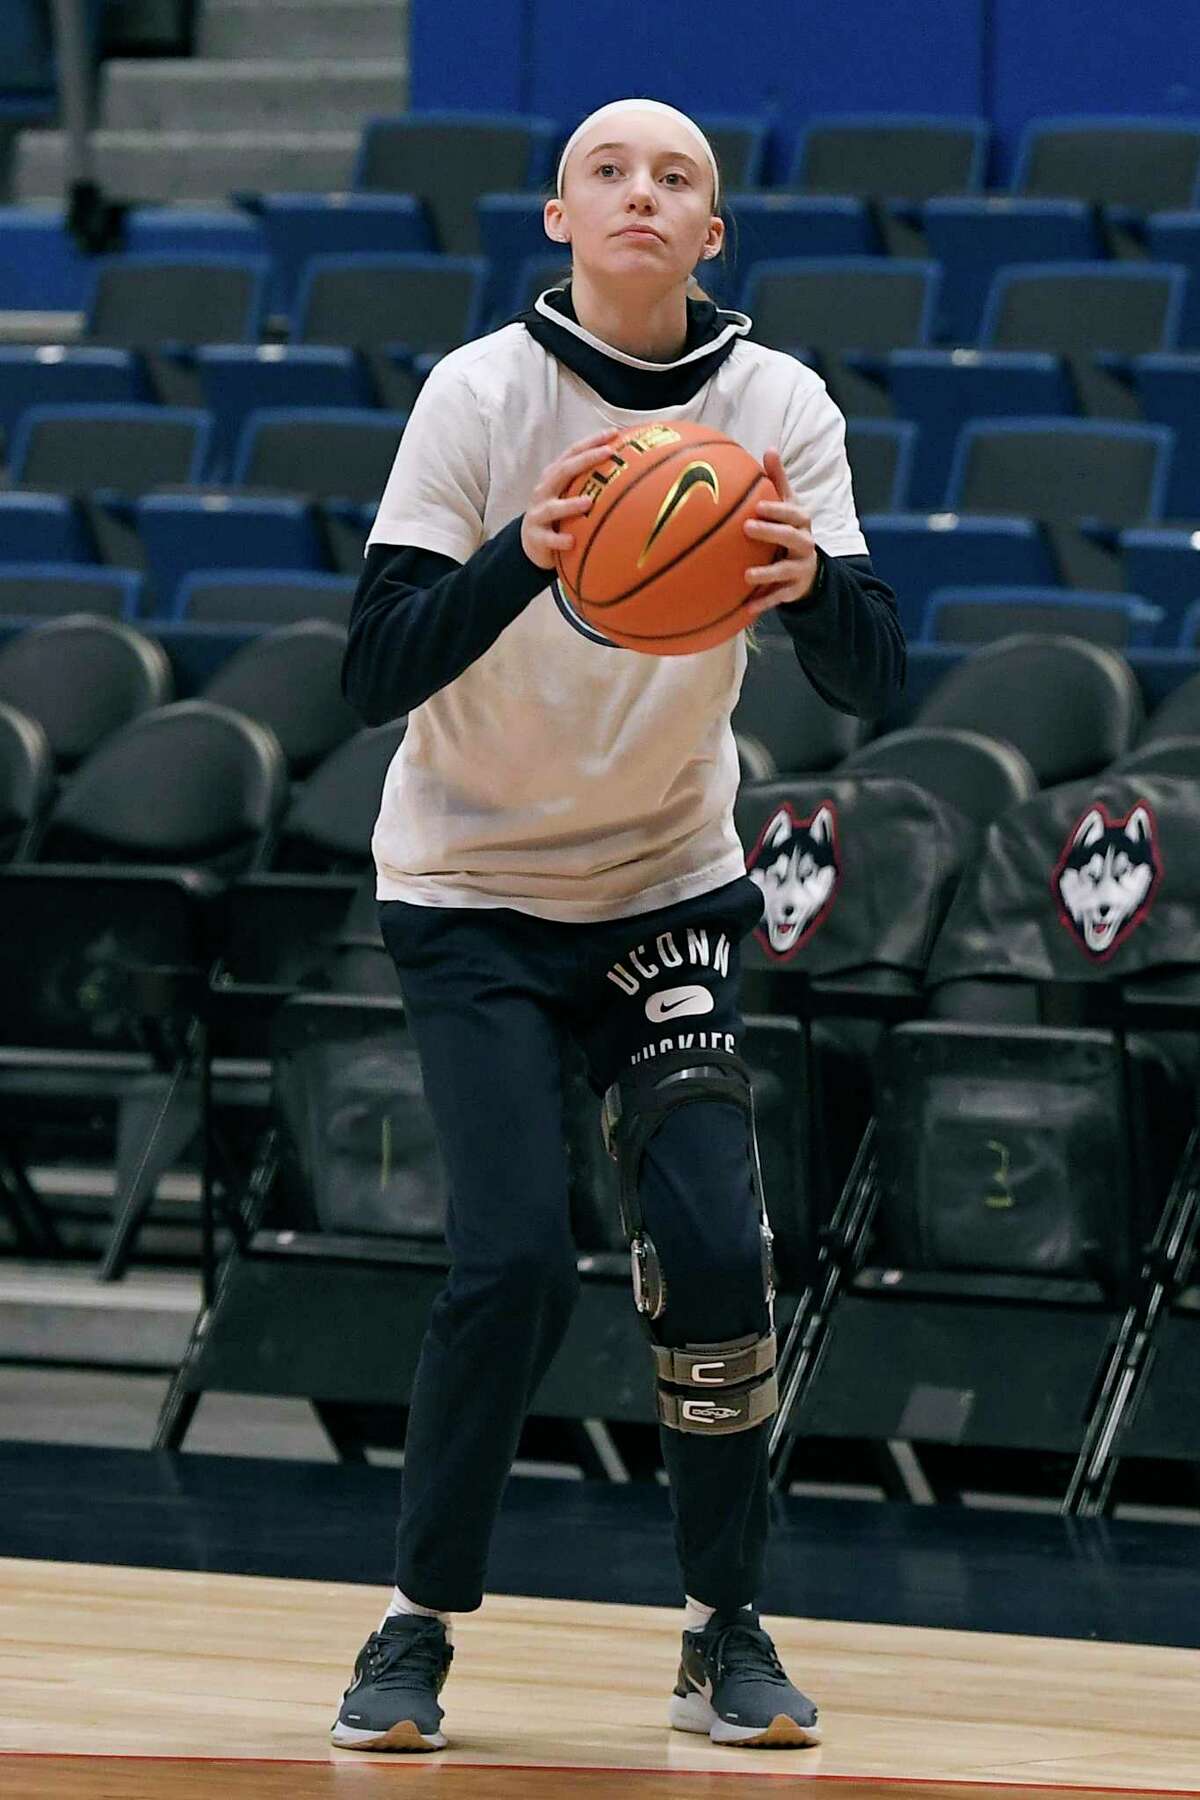 Off crutches, UConn’s Paige Bueckers shoots prior to Saturday’s game against Xavier.